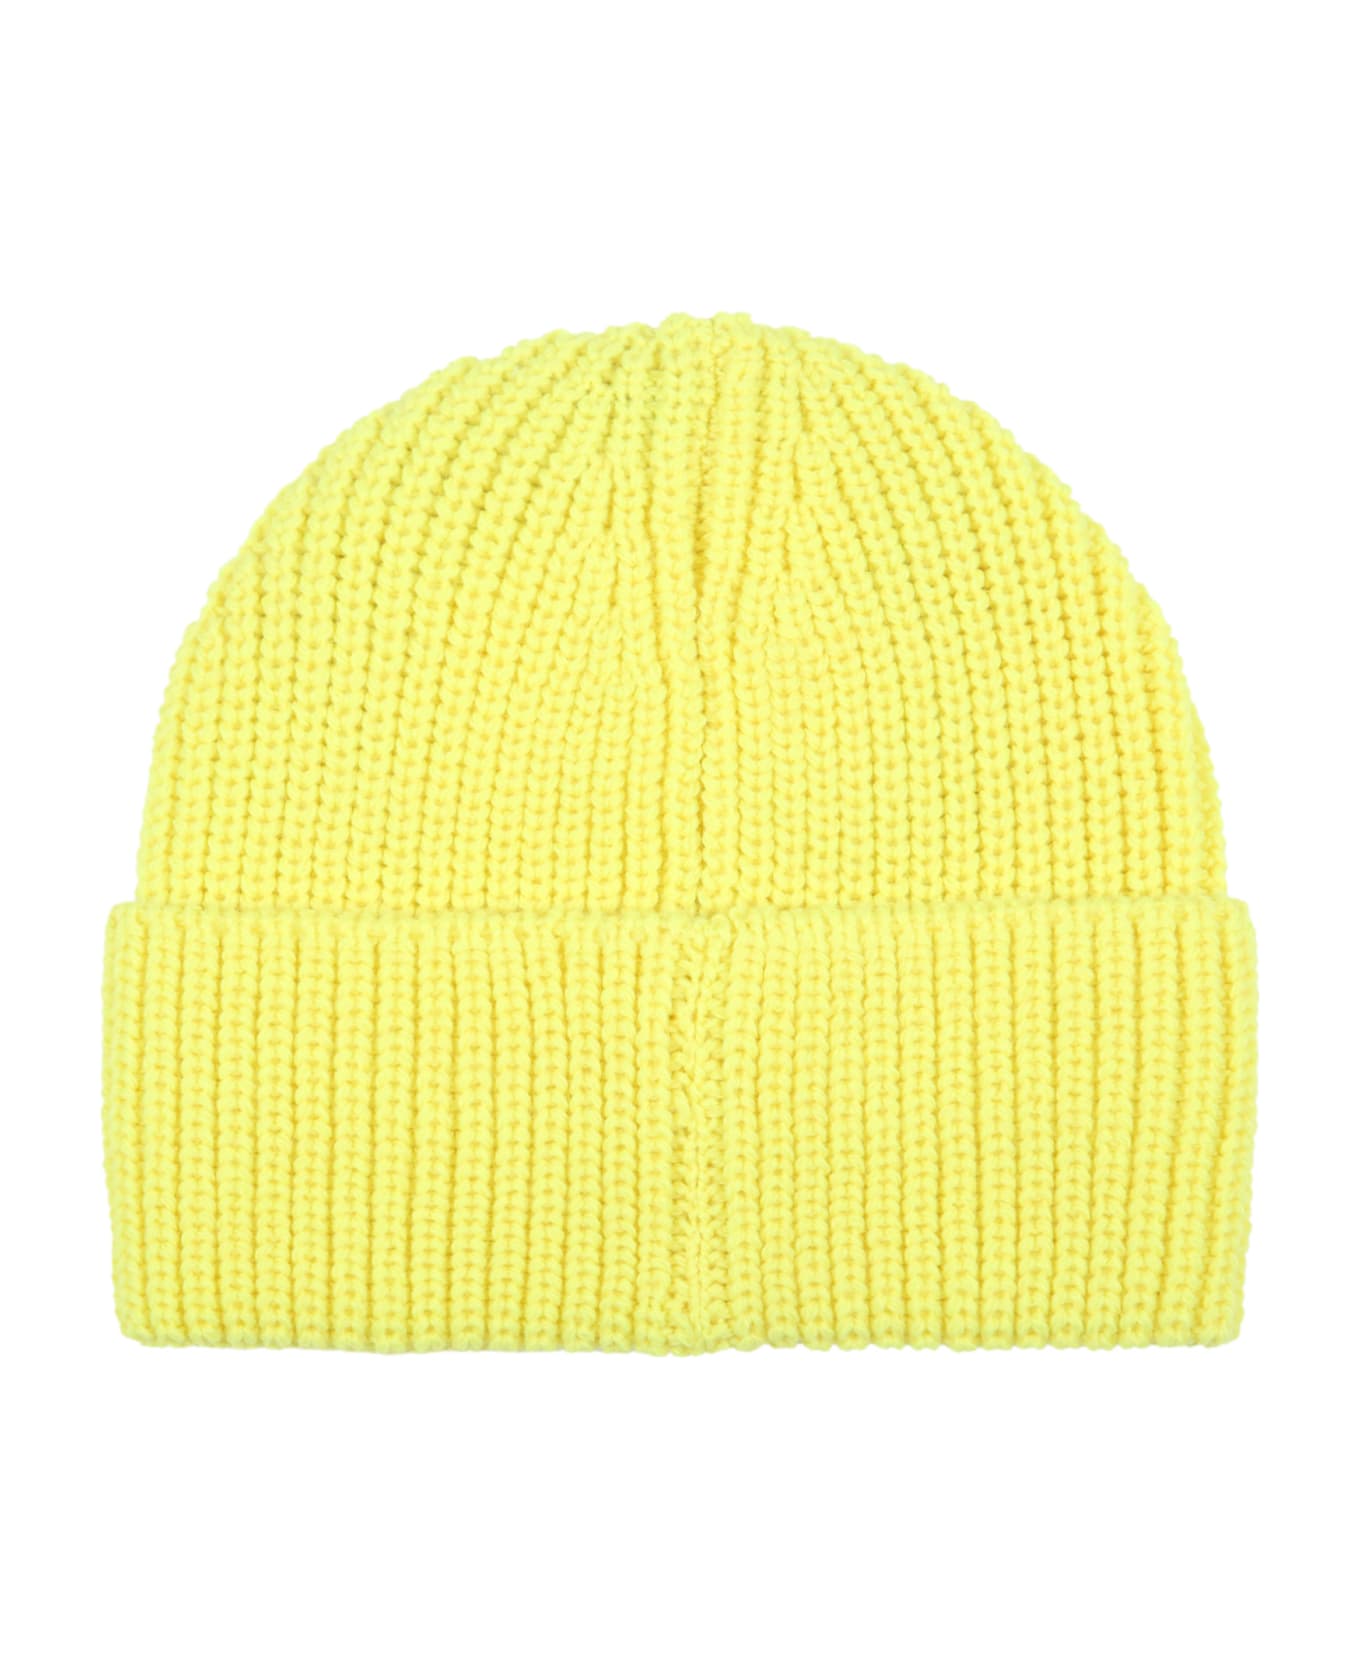 MSGM Yellow Hat For Boy With Black Logo - Yellow